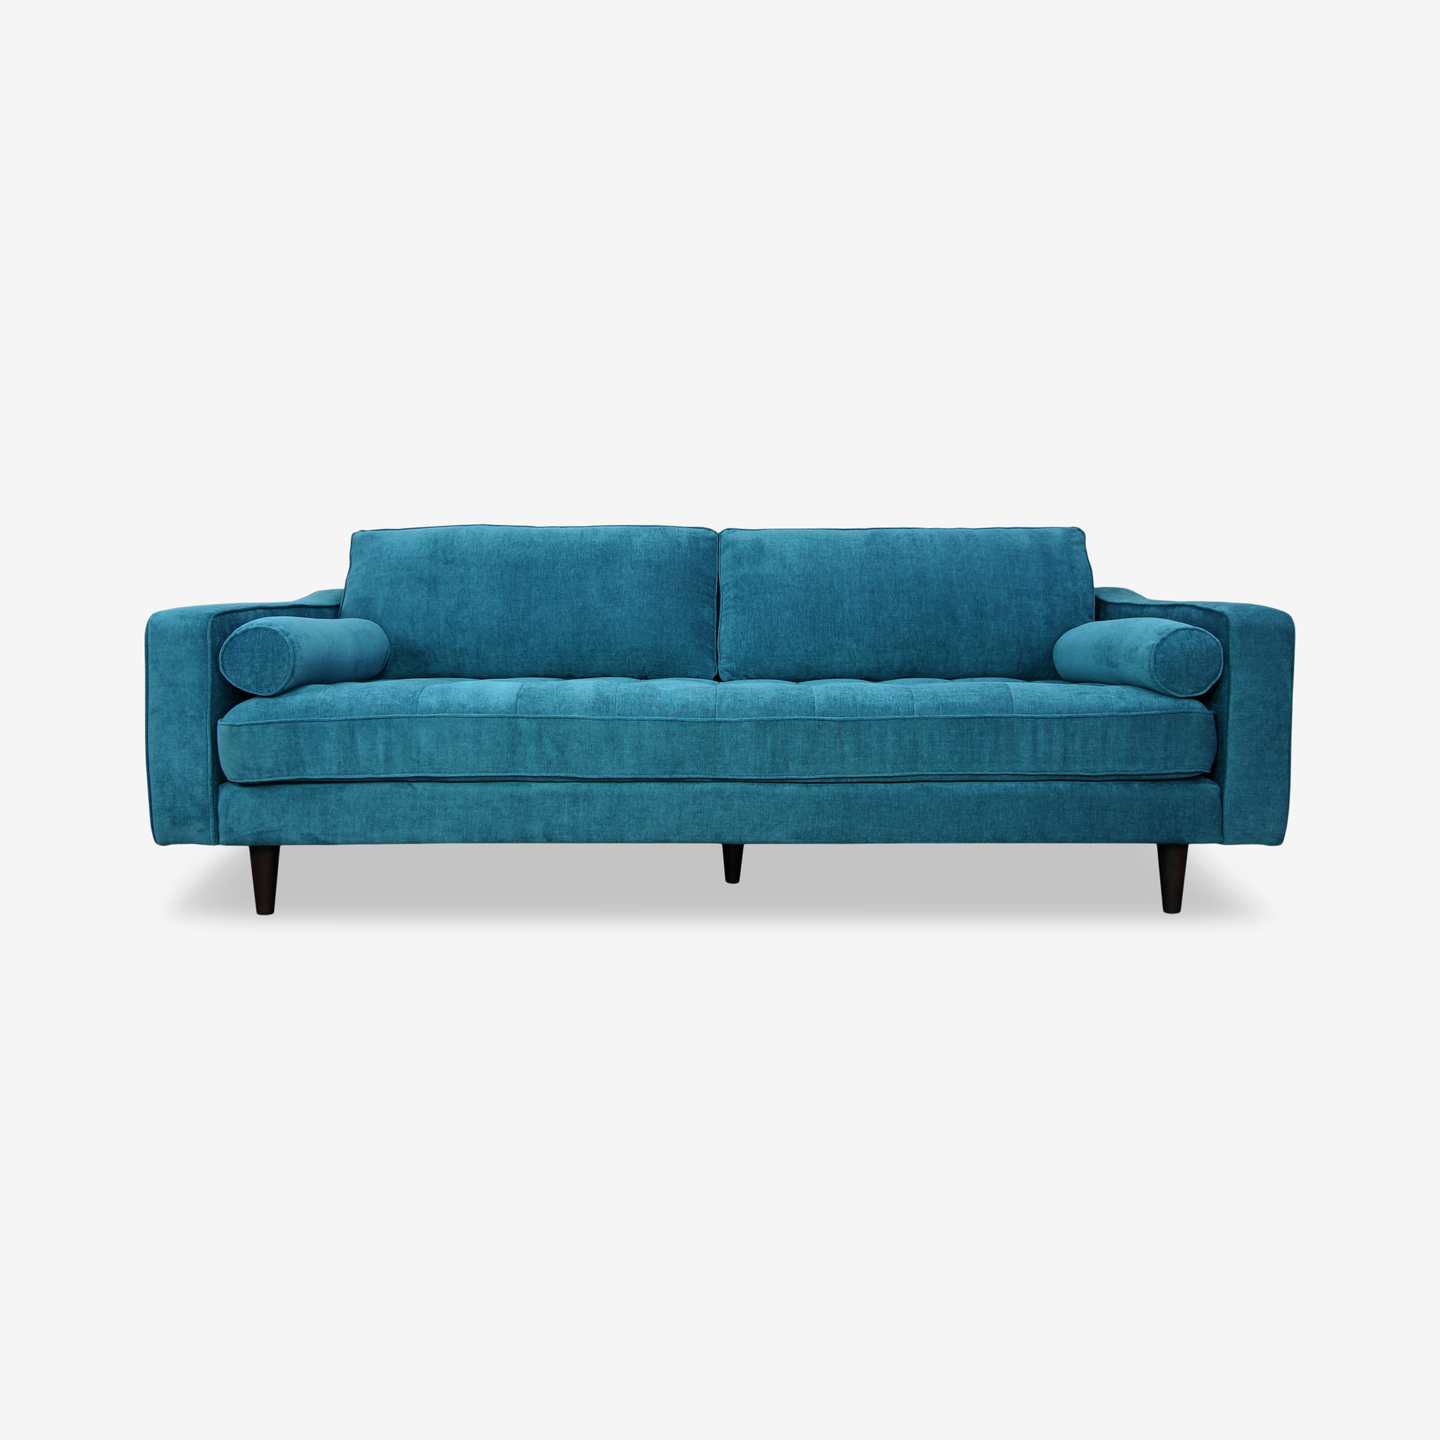 1183_Martell-Sofa-Turquoise_front_2020